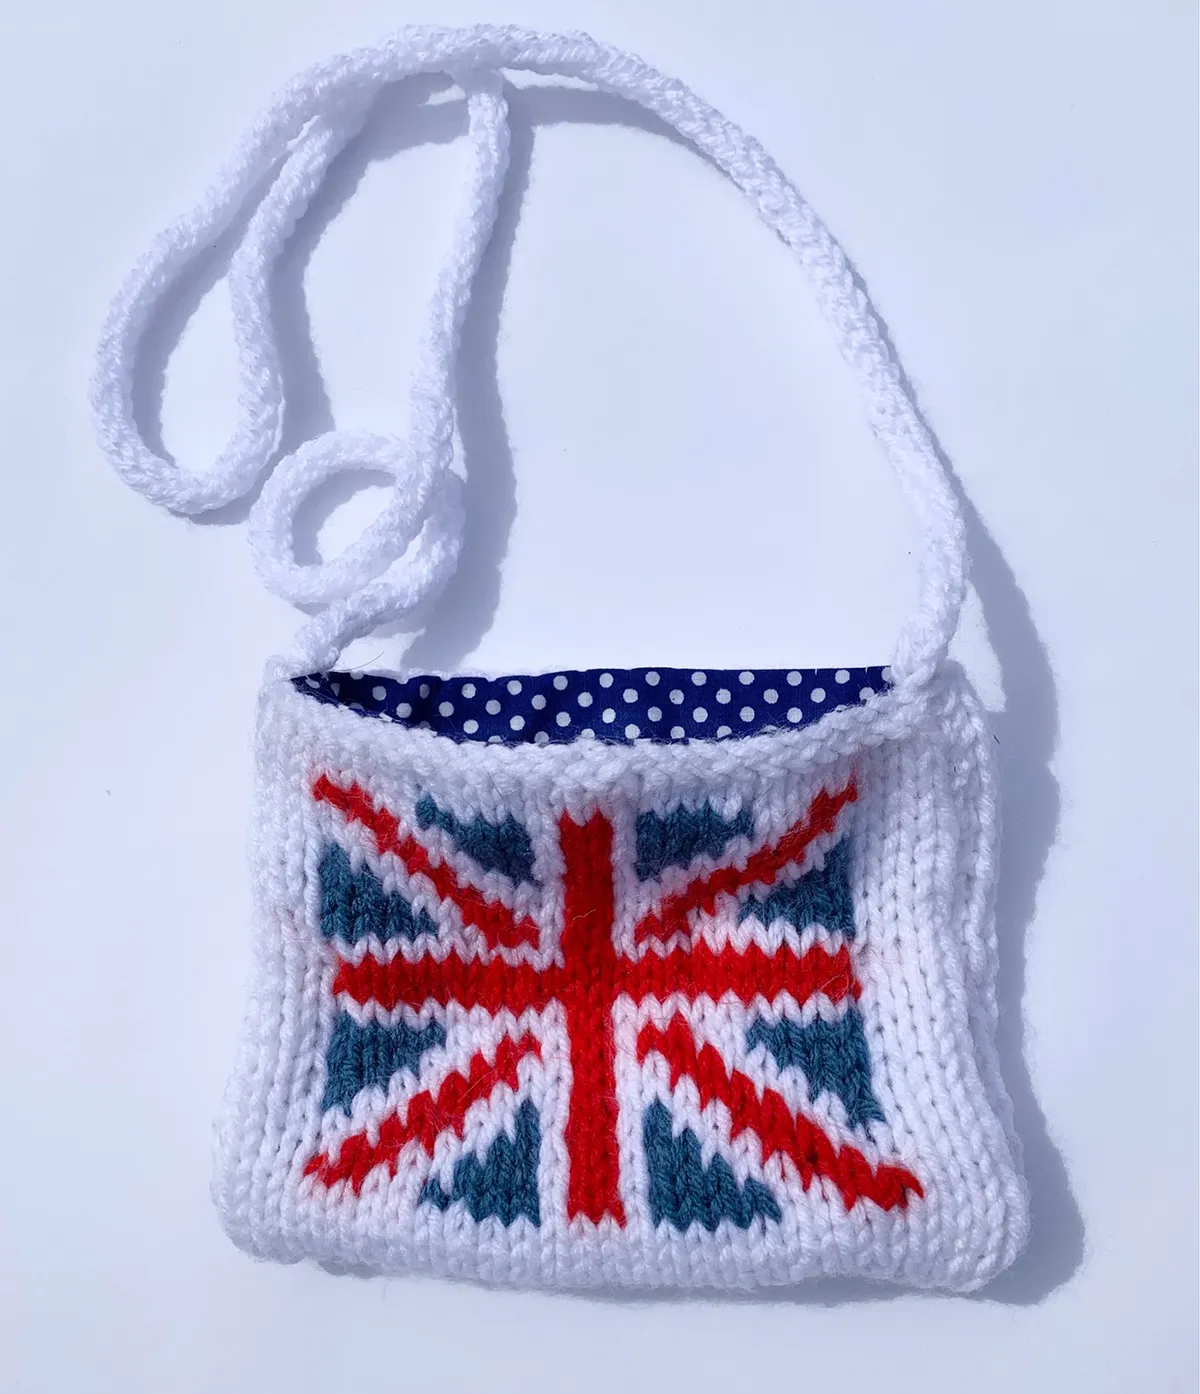 Knitted pouch pattern Olympic Union Jack Knitting Pattern